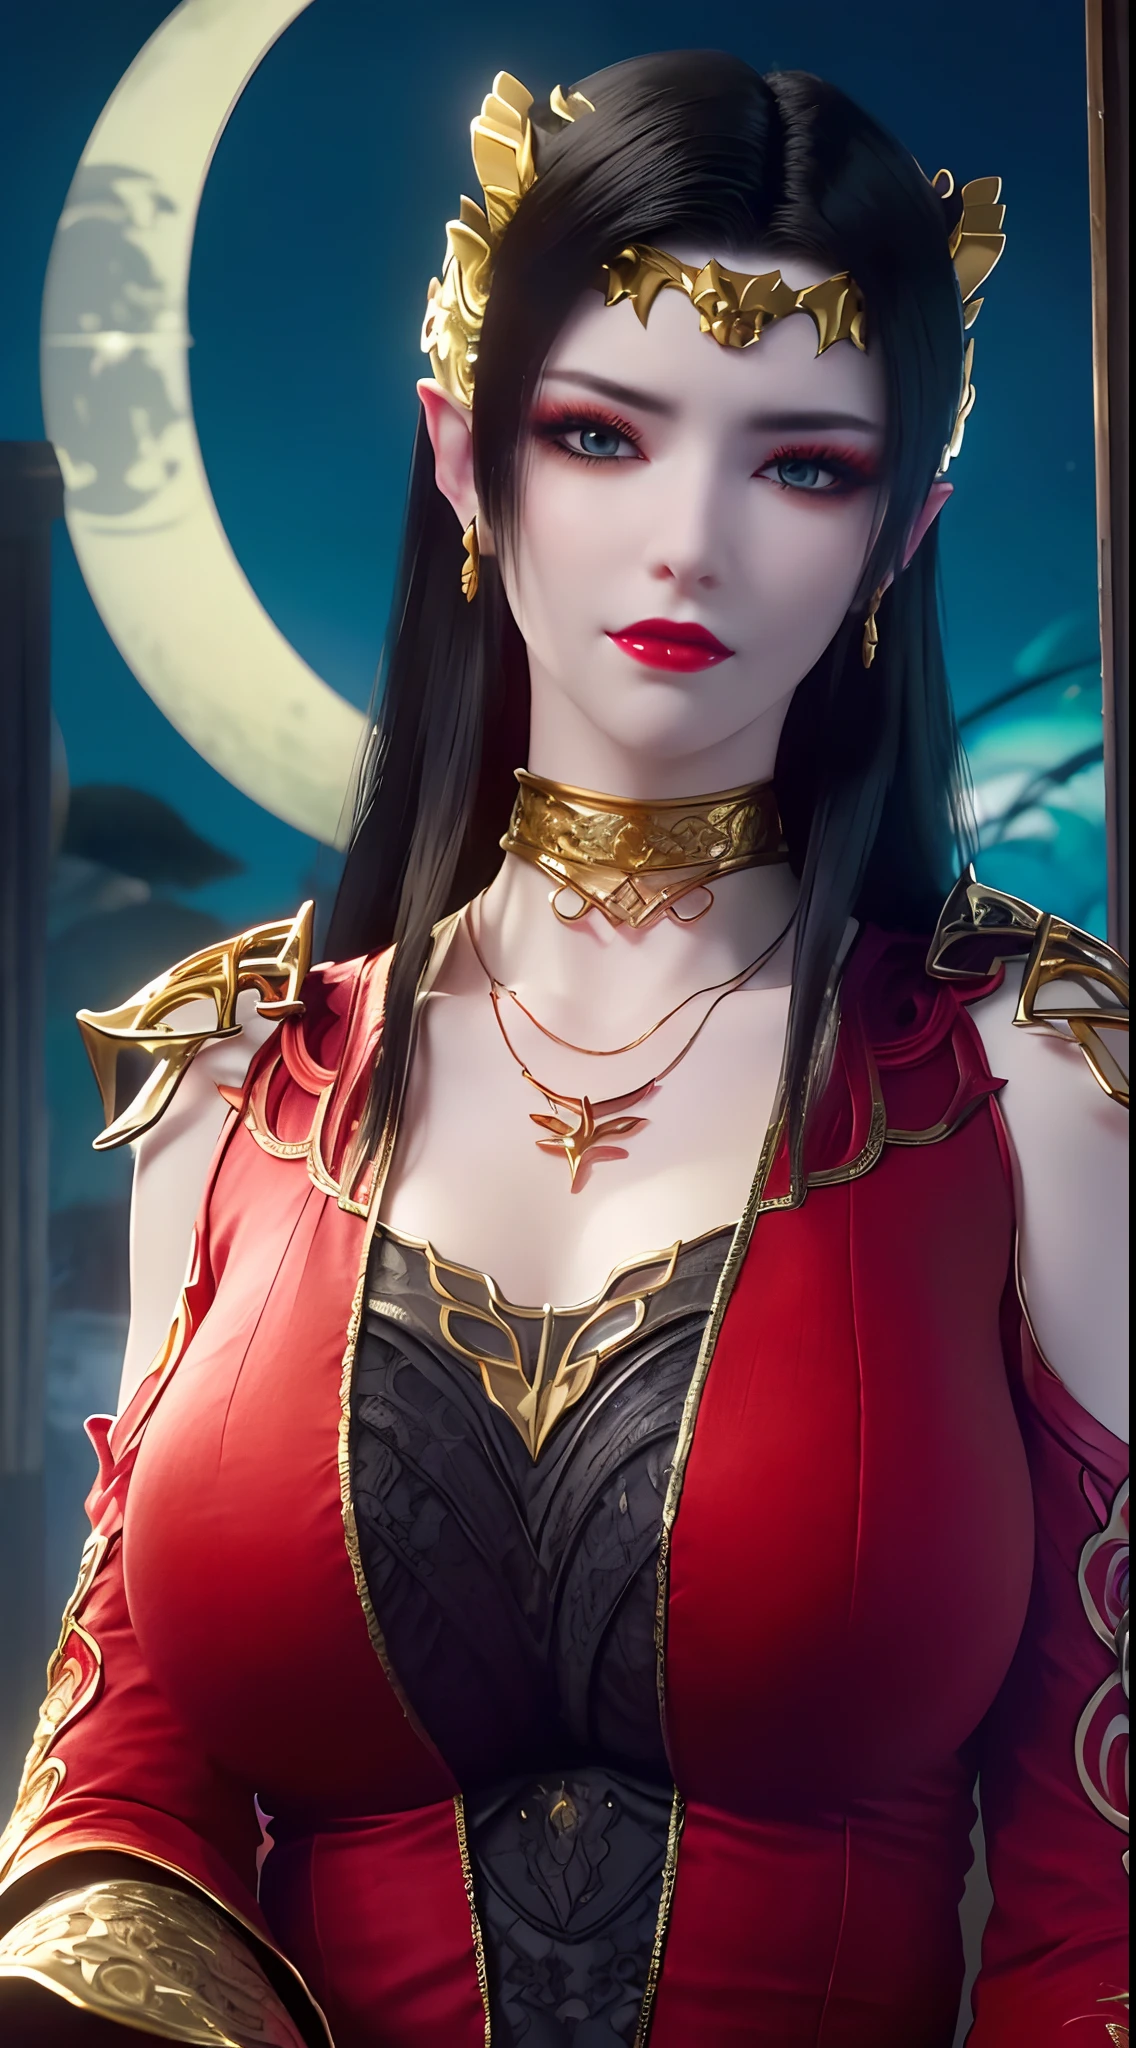 1 extremely beautiful queen, ((wears a red traditional Han costume with thin black patterns:1.6)), (((Patterns on clothes:1.6))), ((long black hair:1.6)), jewelry elaborately made from precious stones and beautiful hair, ((wearing a 24k gold lace necklace:1.4))), the noble, noble style of an extremely beautiful girl, her small face is super cute, her face is very pretty, thin eyebrows, flawless beautiful face, ((black eye pupils: 0.8)), very beautiful eyes, ((platinum blue eyes: 1.6)), (((eyes wide open:1.6))), nice makeup and hair detailed eyelashes, steamy eye makeup, high nose, earrings, red lips, ((closed mouth: 1.5)) beautiful lips, slim hands, most beautiful thighs, ((arms spread out to the sides: 1.5)), rosy face, clean face, flawless beautiful face, smooth white skin, (big breasts: 1.5)), ((high breasts: 1.6)), tight breasts, beautiful cleavage, (((big breasts and super round: 1.8))), ((super tight breasts: 1.7)) , beautiful breasts, perfect body, back arms, chest out, thin black mesh stockings with black lace trim, 8k photo, super high quality, super realistic, super 10x pixels, optical, bright studio, bright edges, dual-tone lighting, (high-detail skin:1.2), super 8k, soft lighting, high quality, volumetric lighting, photorealistic, photorealistic high resolution, lighting, best photo, 4k, 8k quality, blur effect, smooth sharp, 10 x pixel, ((sea and moonlight at night background:1.5)), aurora, lightning, super graphics realistic, most realistic graphics, 1 girl, alone, solo, Extremely sharp image, surreal, (((frontal portrait: 1)))."